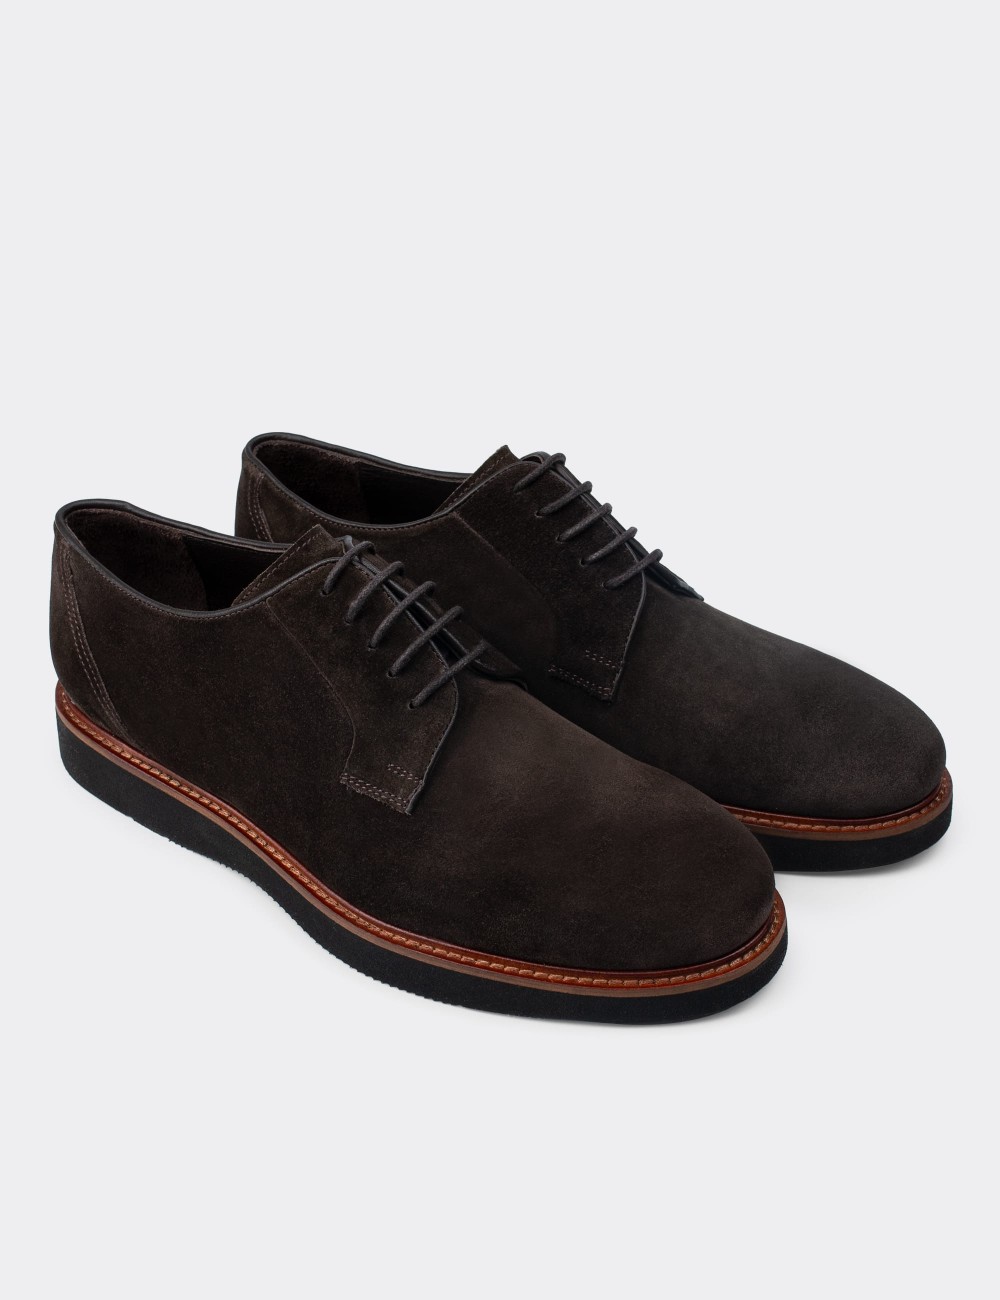 Brown Suede Leather Lace-up Shoes - 01090MKHVE15